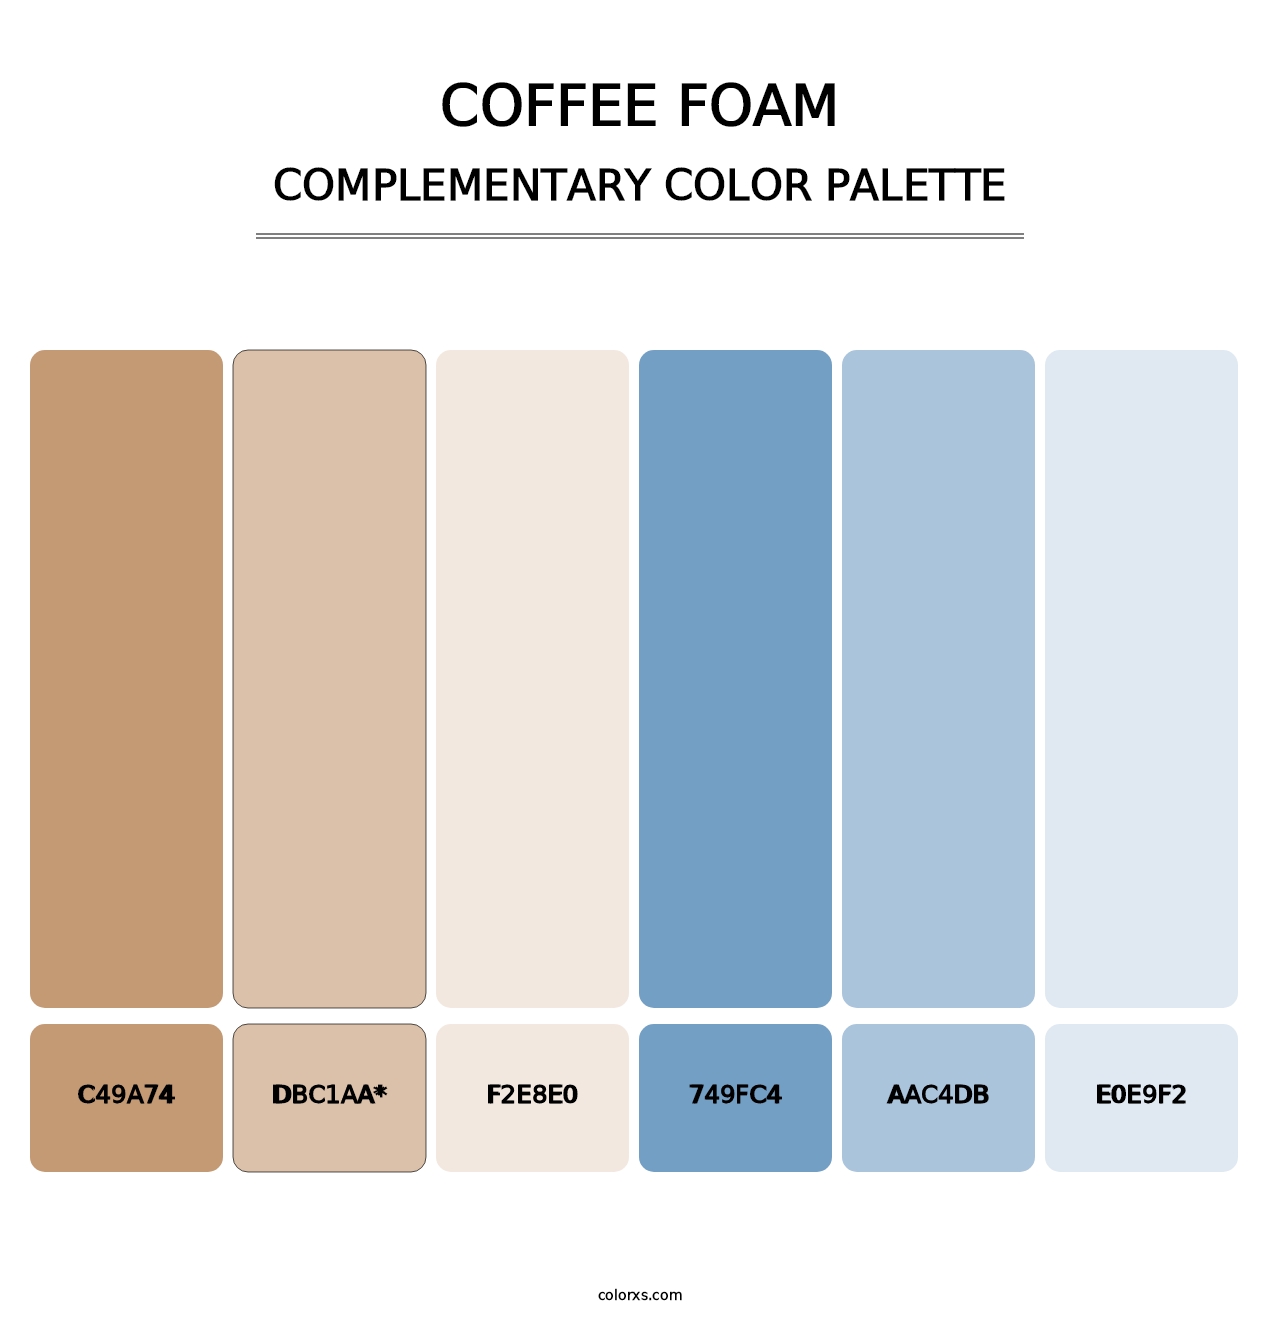 Coffee Foam - Complementary Color Palette